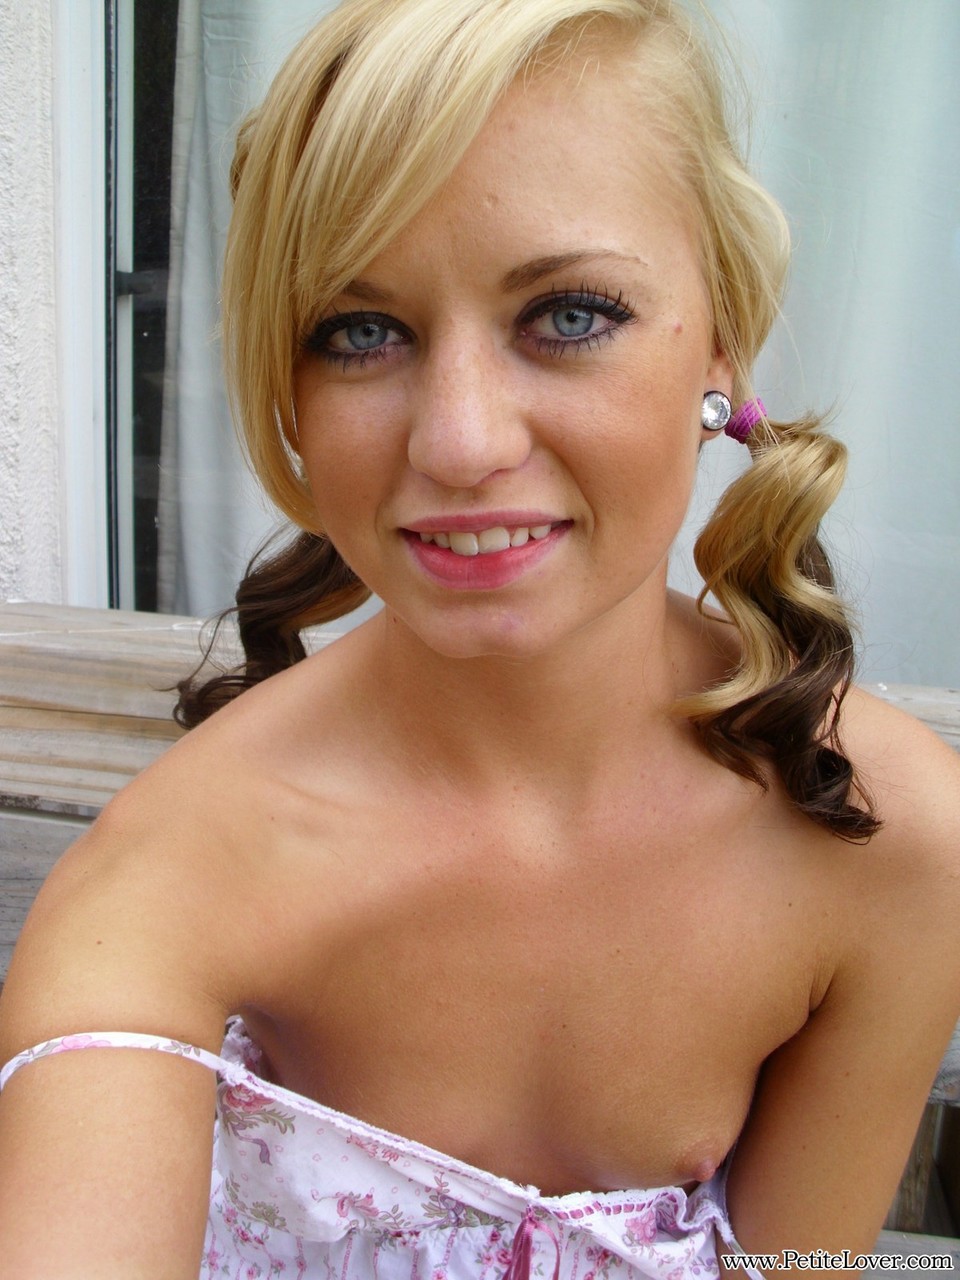 Cute blonde Tiff in pigtails showing off her wee small tits & tiny bald pussy порно фото #428478640